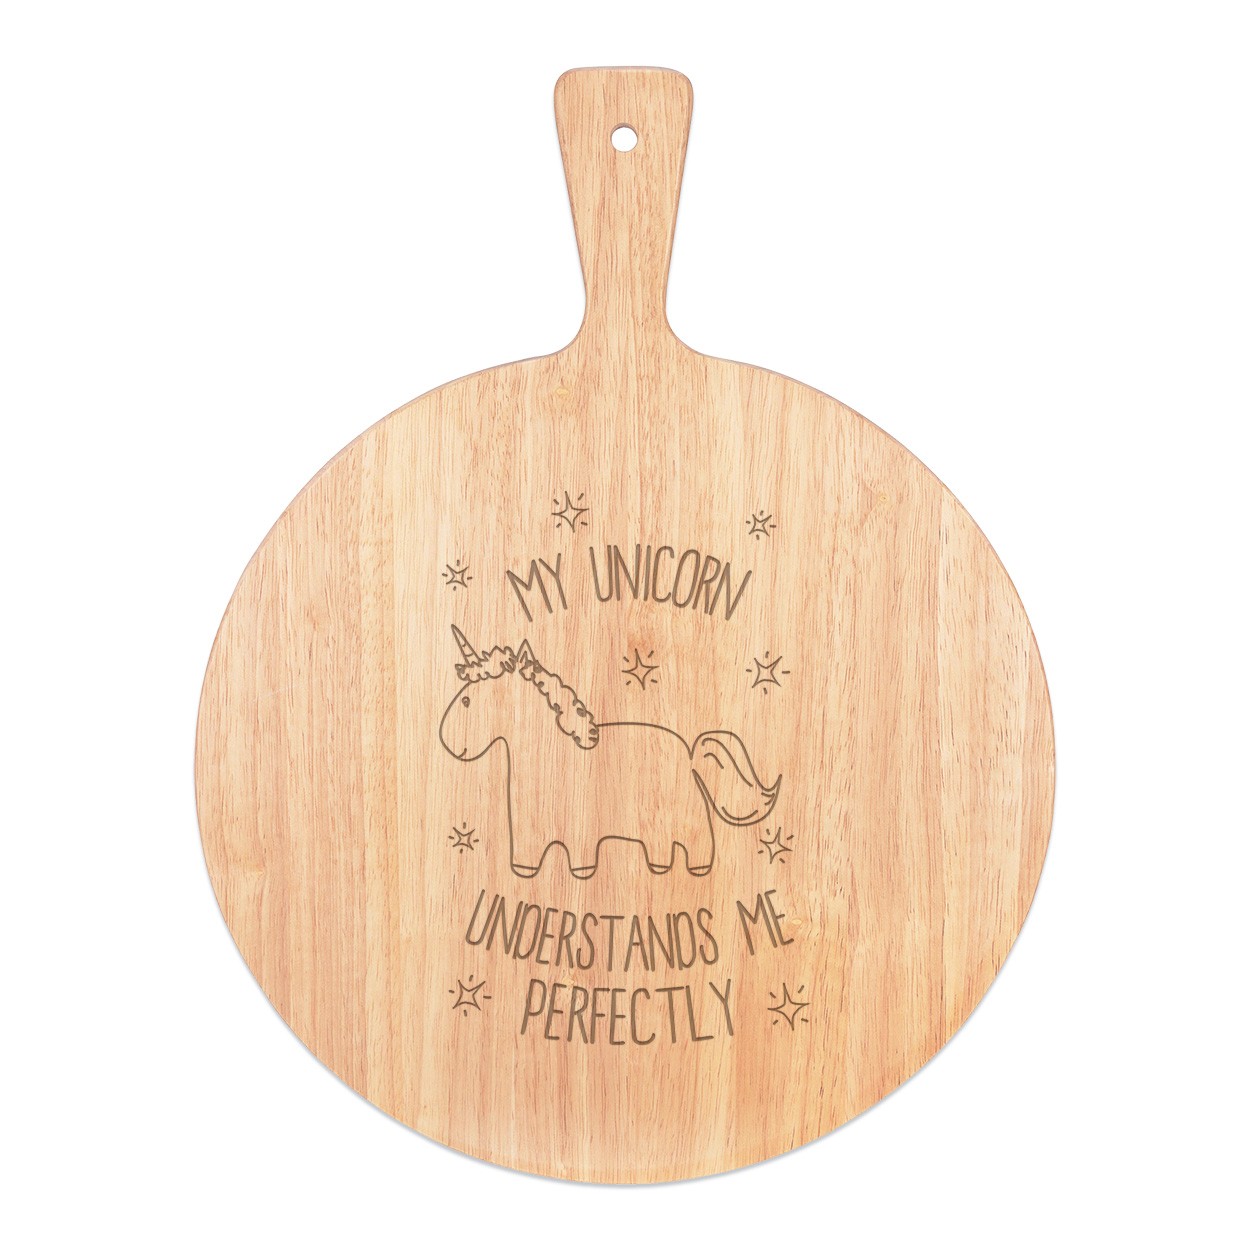 Lila My Unicorn Understands Me Pizza Board Paddle Serving Tray Handle Round Wooden 45x34cm